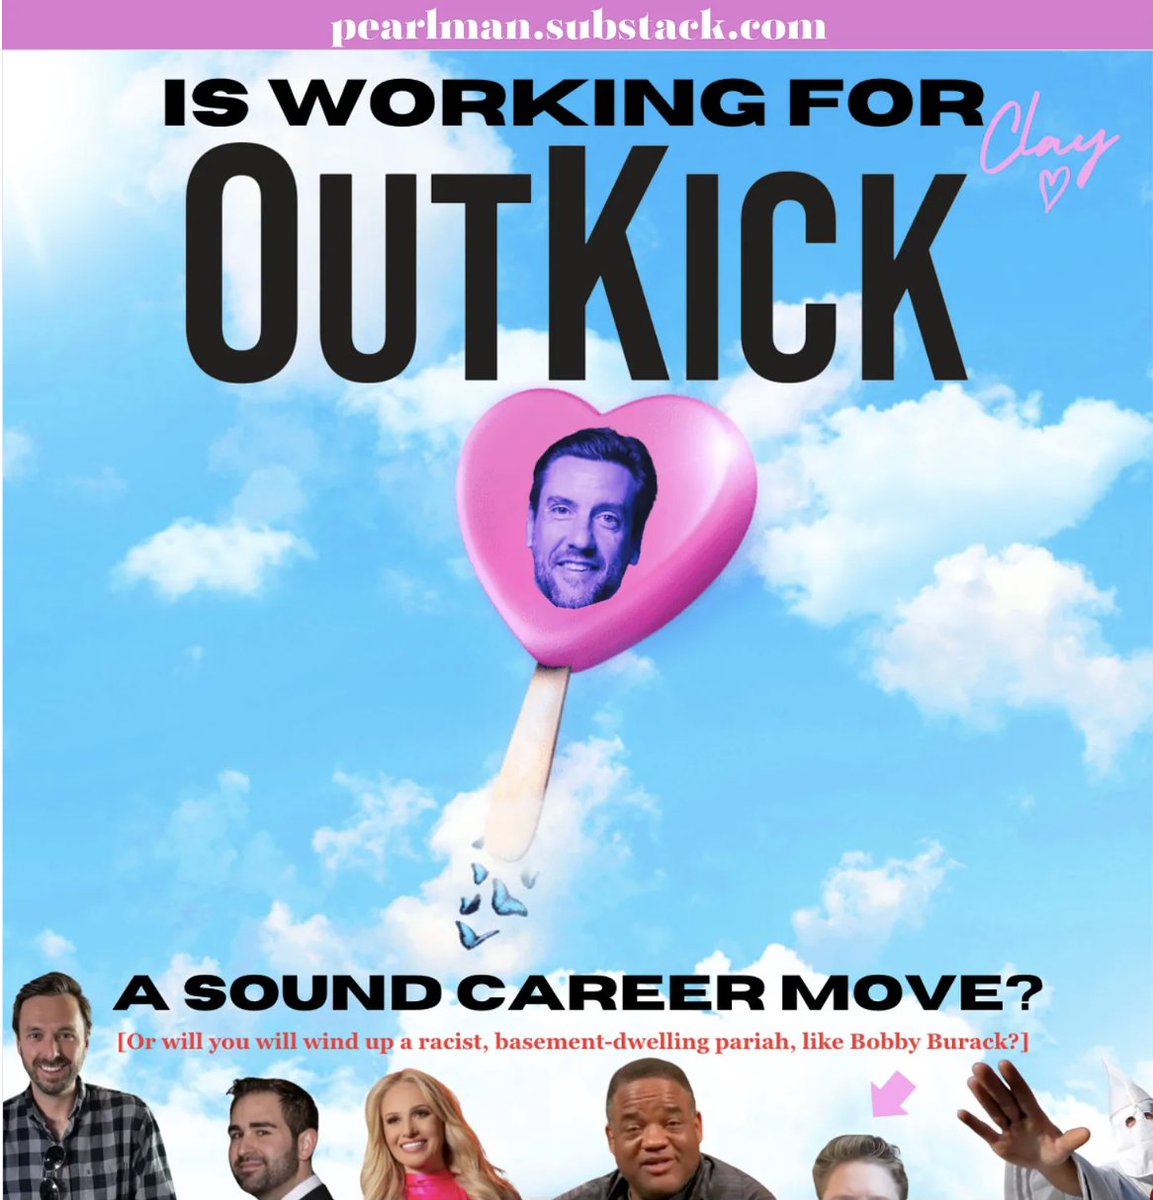 I don't know whether @dhookstead and @RealDanZak are good or bad dudes. But I do think, by working for @outkick, any goals of being employed elsewhere are pretty dead. This week's Yang delves in: pearlman.substack.com/p/the-yang-sli…